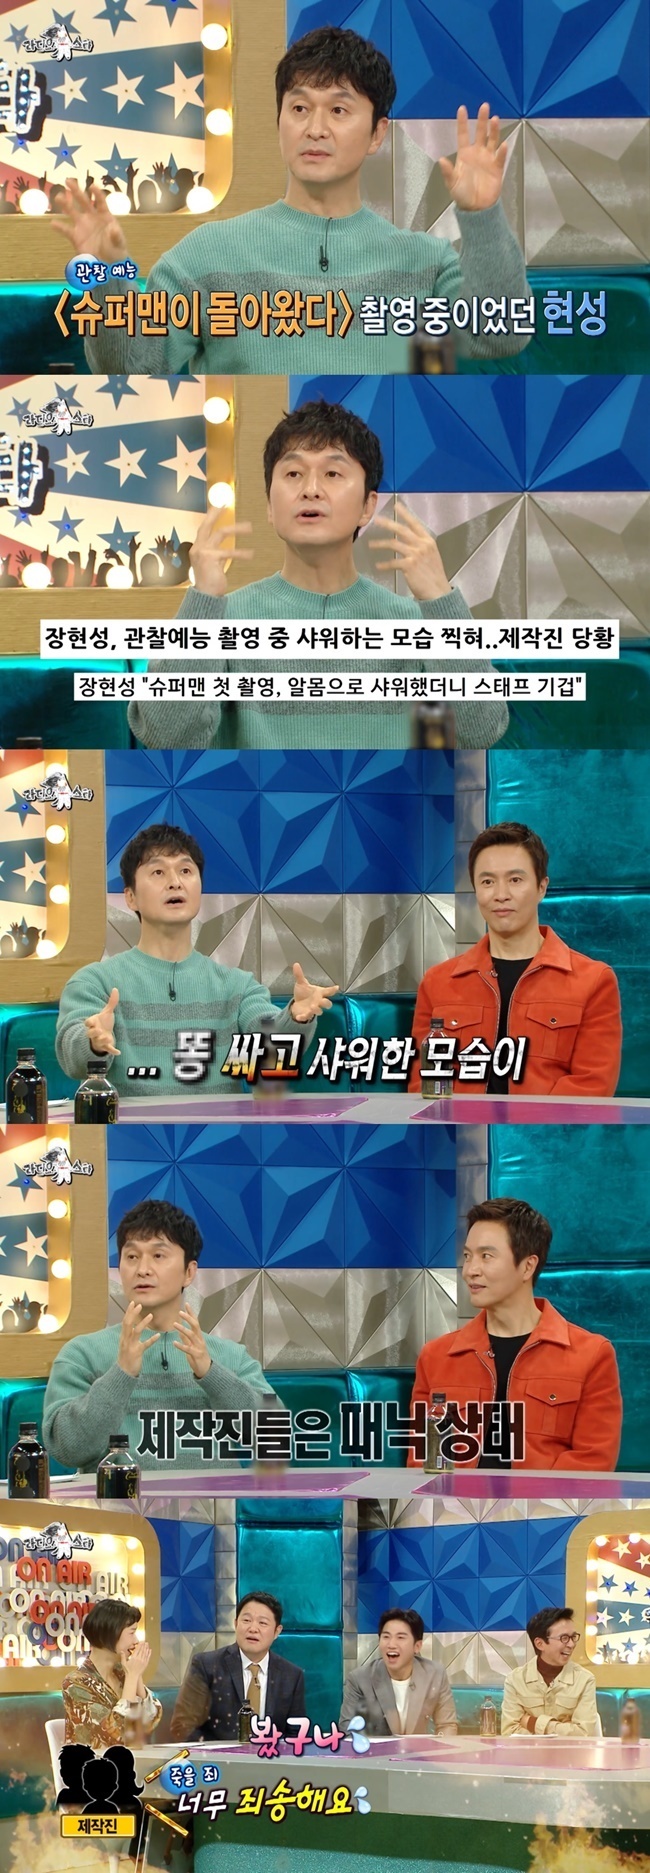 Actor Jang Hyun-sung recalled the dizzying moment he almost got sided (?) during filming Shudol.On MBCs Radio Star (hereinafter referred to as Radio Star), which aired on December 15, it was featured as a special feature Call Me My Name, featuring Jang Hyun-sung, Kim Jung-min, Ahn Eun-jin and Kim Kyung-nam as guests.On the show, Jang Hyun-sung recalled the days when he appeared on observation entertainment on KBS 2TV Superman Returns (hereinafter referred to as Shudol).I didnt know what the system was and I only heard about the camera hiding all over the house. When I wake up in the morning, I start, and I drink water and go to the bathroom and get all the processes taken, he said.Jang Hyun-sung was photographed showering at the observation entertainment, and the crew edited it urgently later.But the knight was very refined, so he went out. He was photographed with a shitty shower. He explained that the camera was installed in the bathroom because of the childrens bathing.Jang Hyun-sung said, The production team did not think about it. When I came out to see the work, the production team said that I was so sorry that my face was white.I said, What are you sorry for? I laughed at the anecdote that almost got rid of.